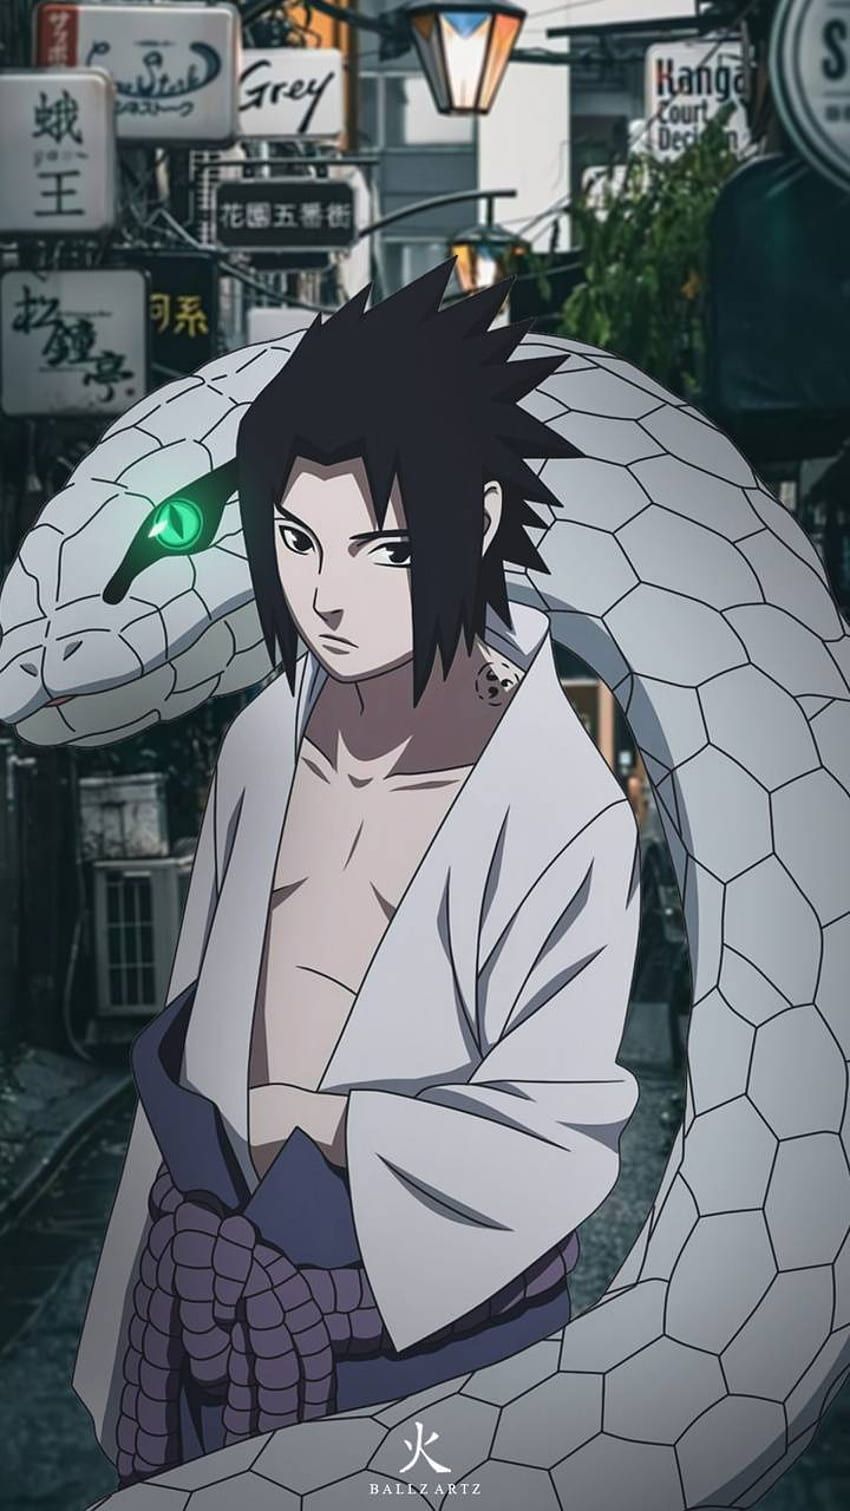 A picture of the character Naruto, with a snake wrapped around his neck - Sasuke Uchiha